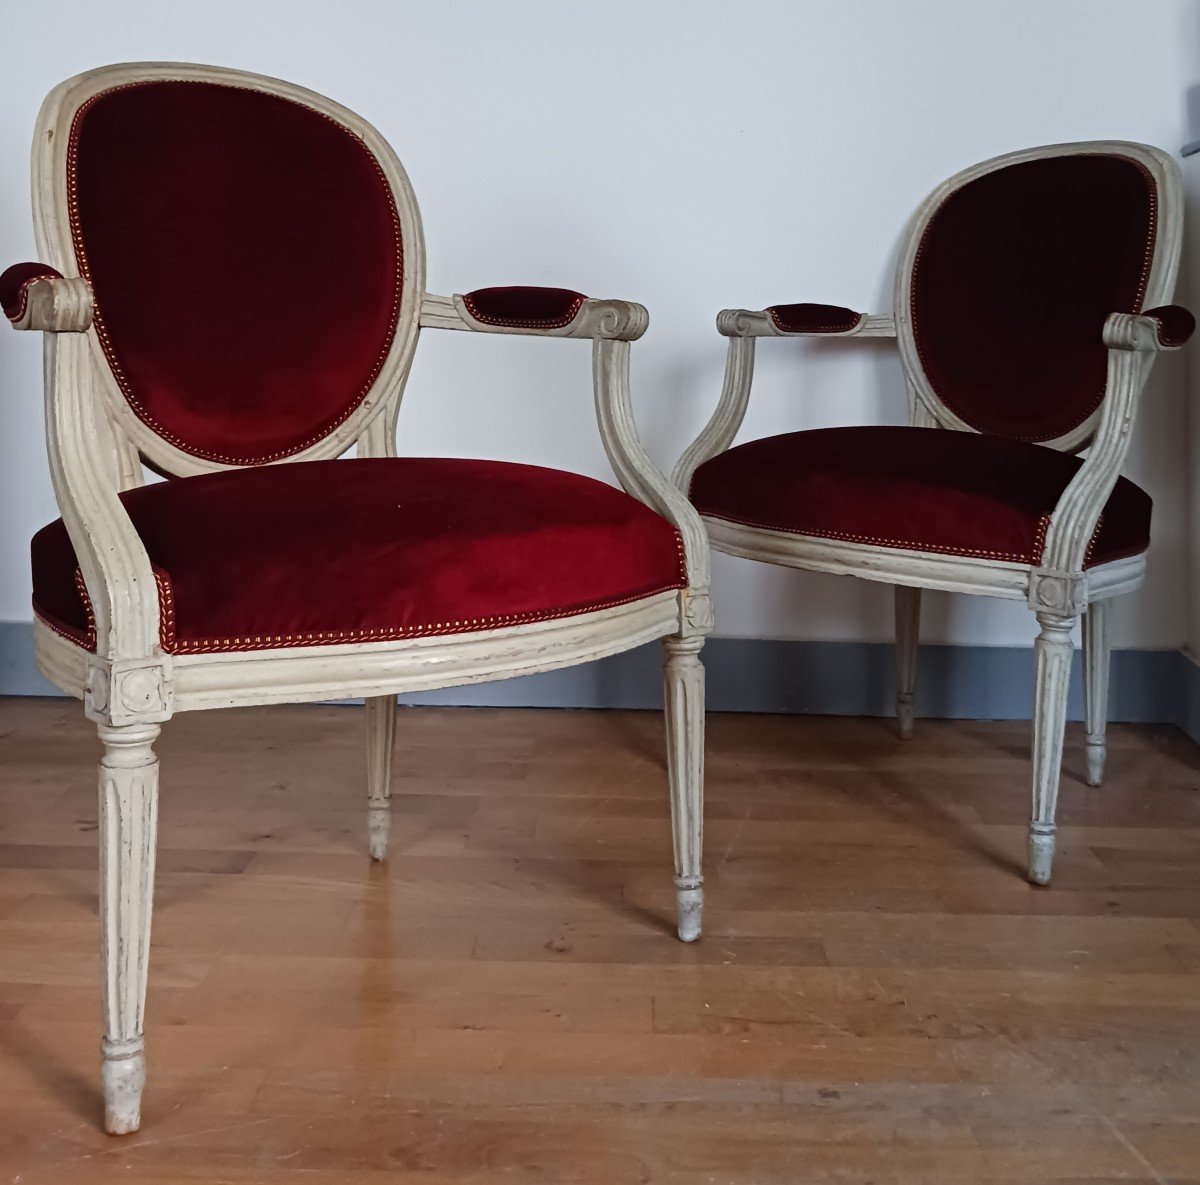 Claude Gorgu, Master In 1770 - Pair Of Cabriolet Armchairs - Restored - Mottled Velvet - Inventory Number-photo-3